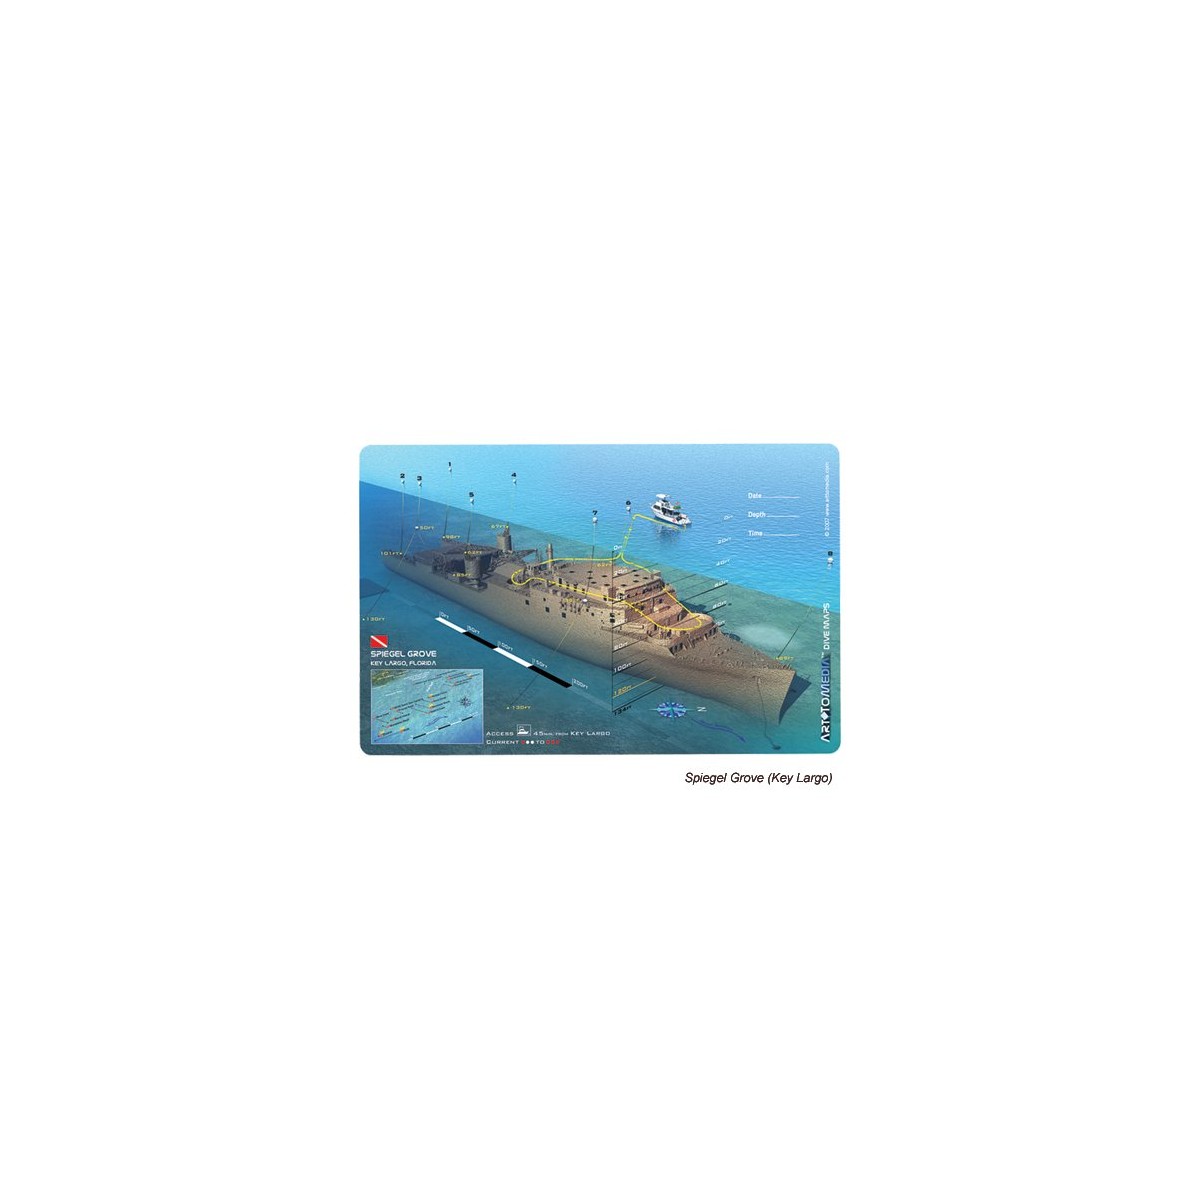 Spiegel Grove in Key Largo, Florida (8.5 x 5.5 Inches) (21.6 x 15cm) - New Art to Media Underwater Waterproof 3D Dive Site Map